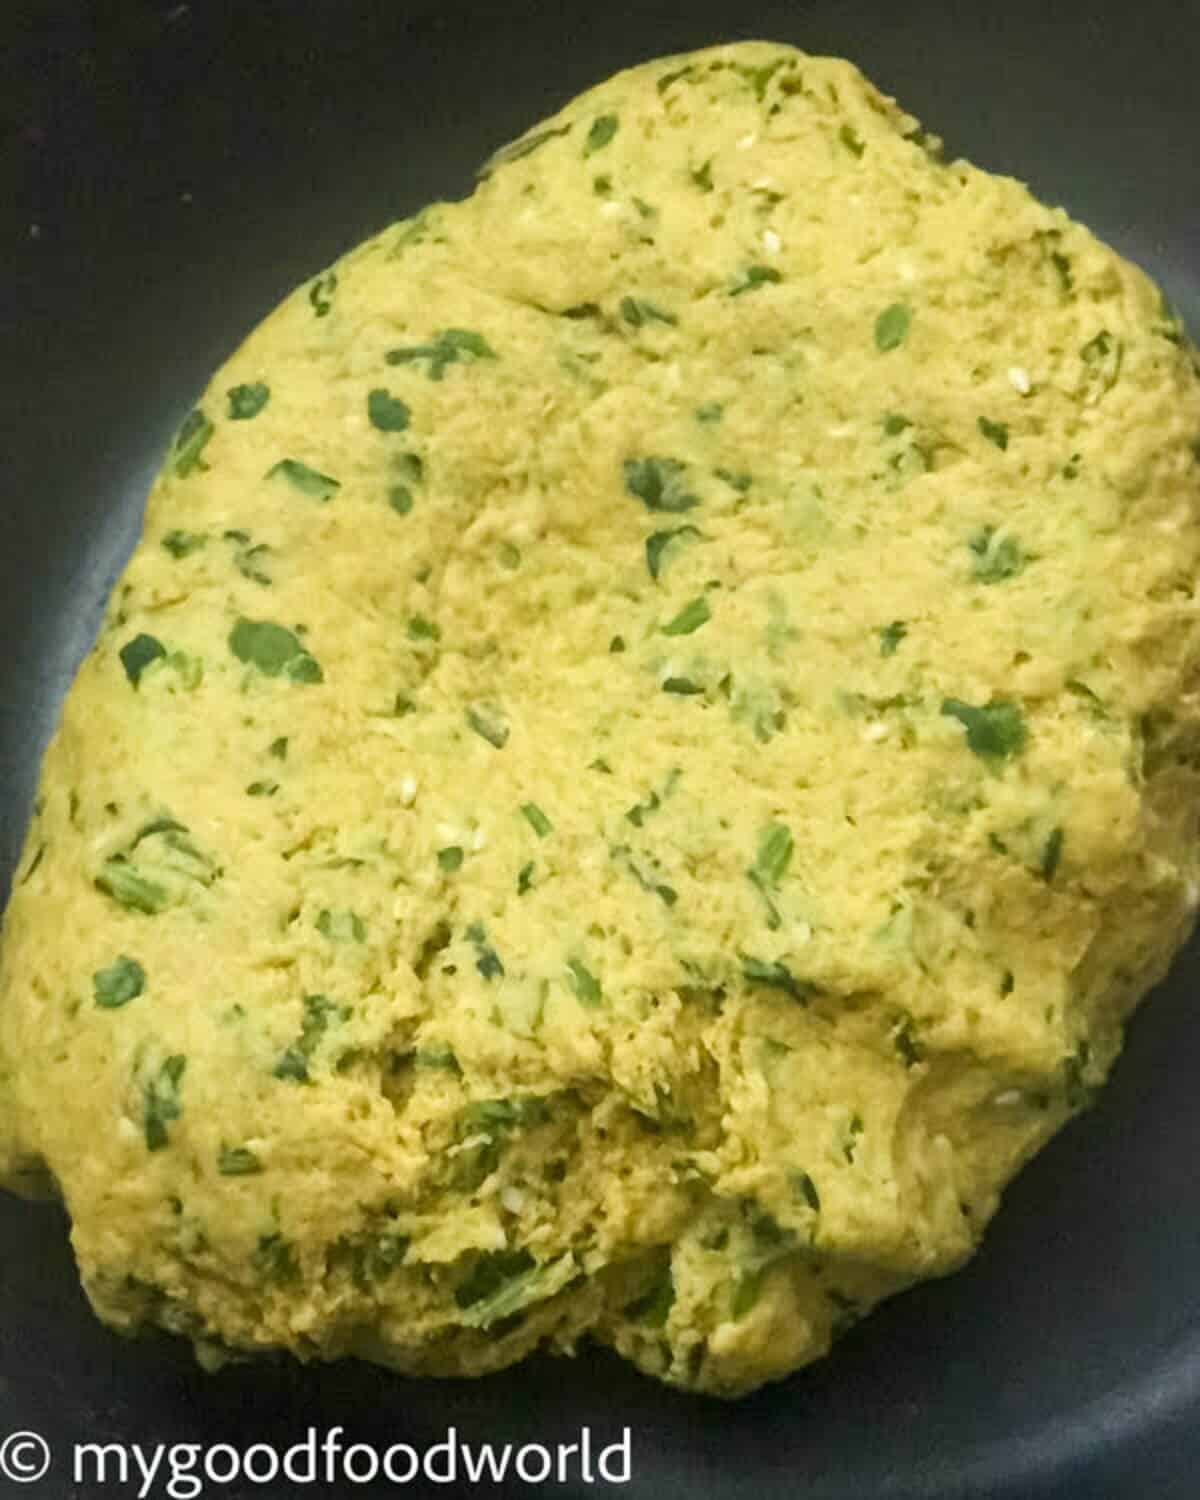 Yellow colored dough with specks of green cilantro and other spices placed in a bowl.